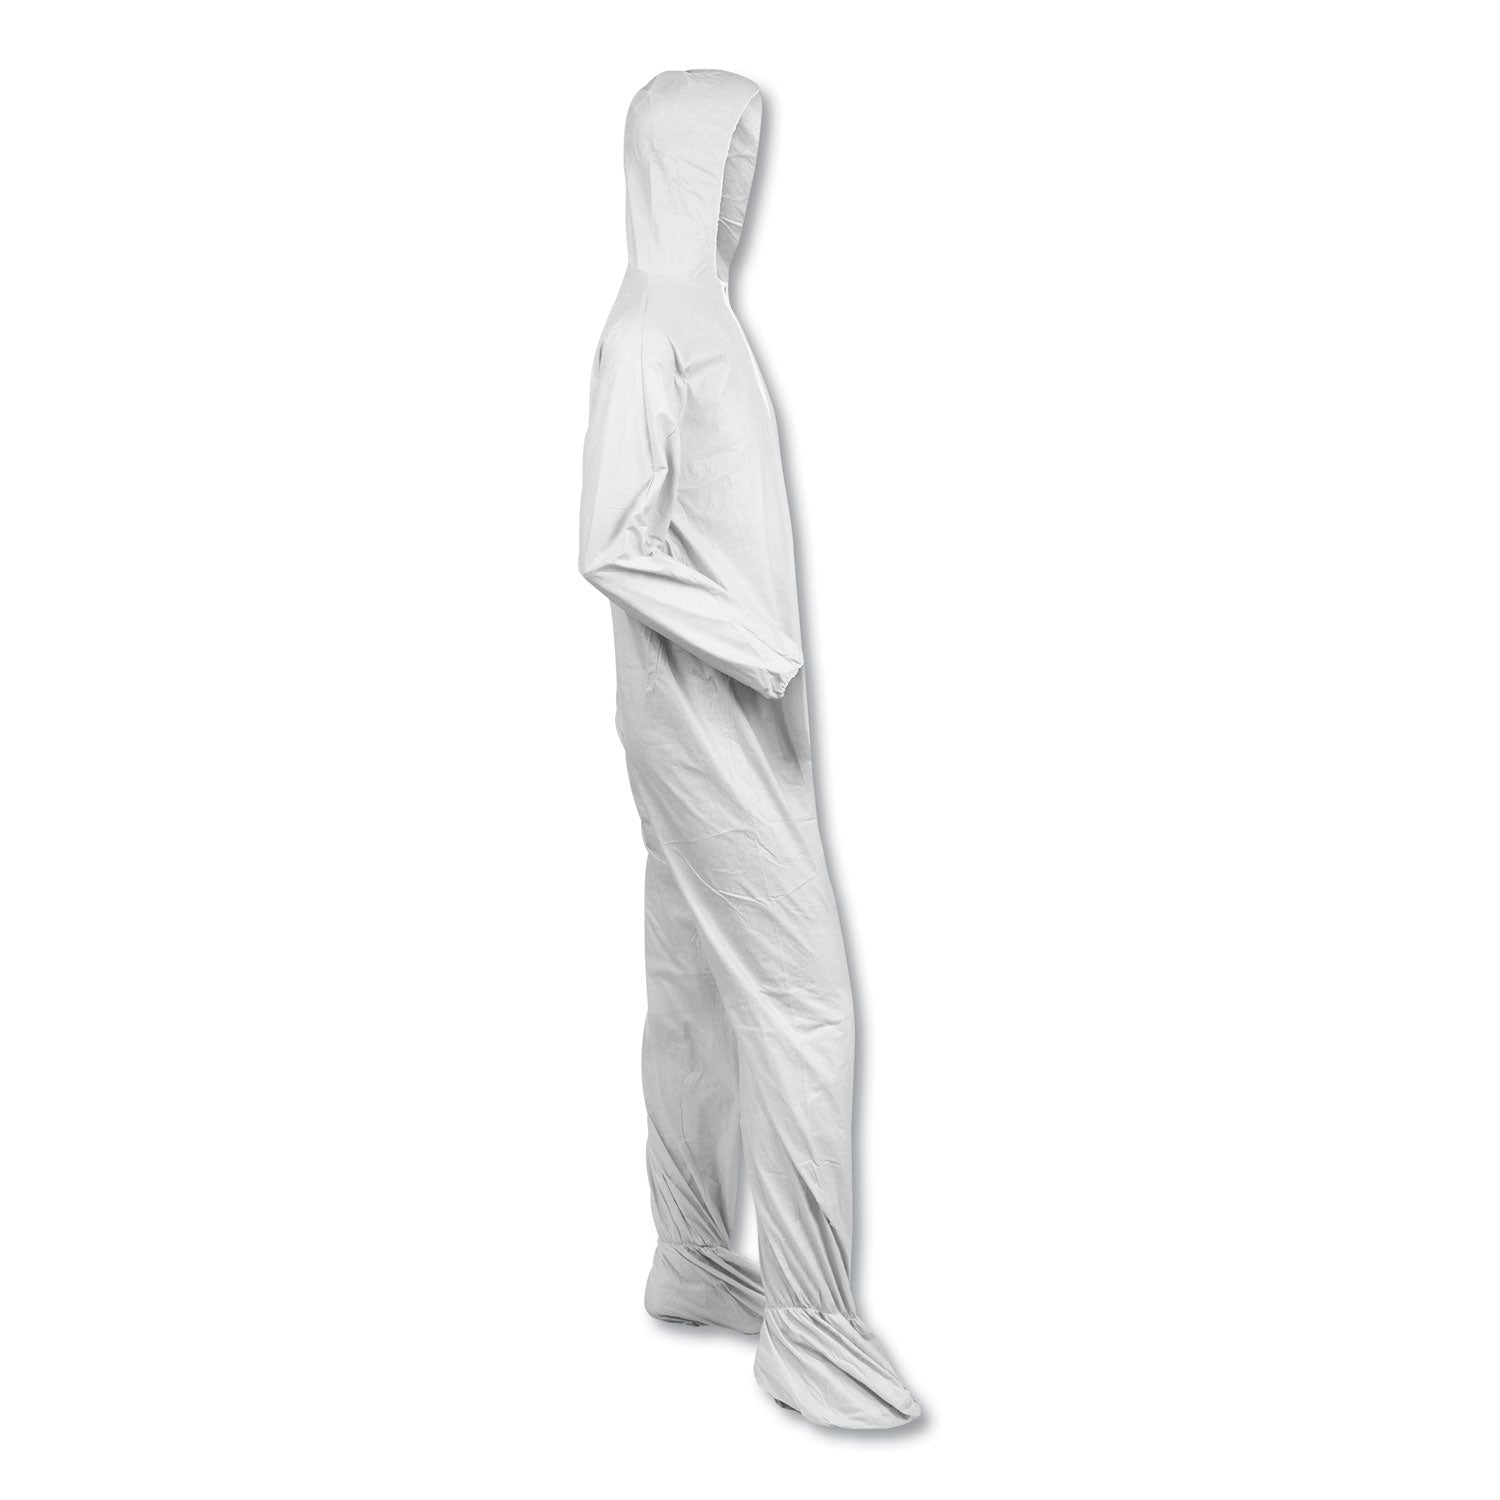 A40 Elastic-Cuff, Ankle, Hood and Boot Coveralls, 2X-Large, White, 25/Carton - 